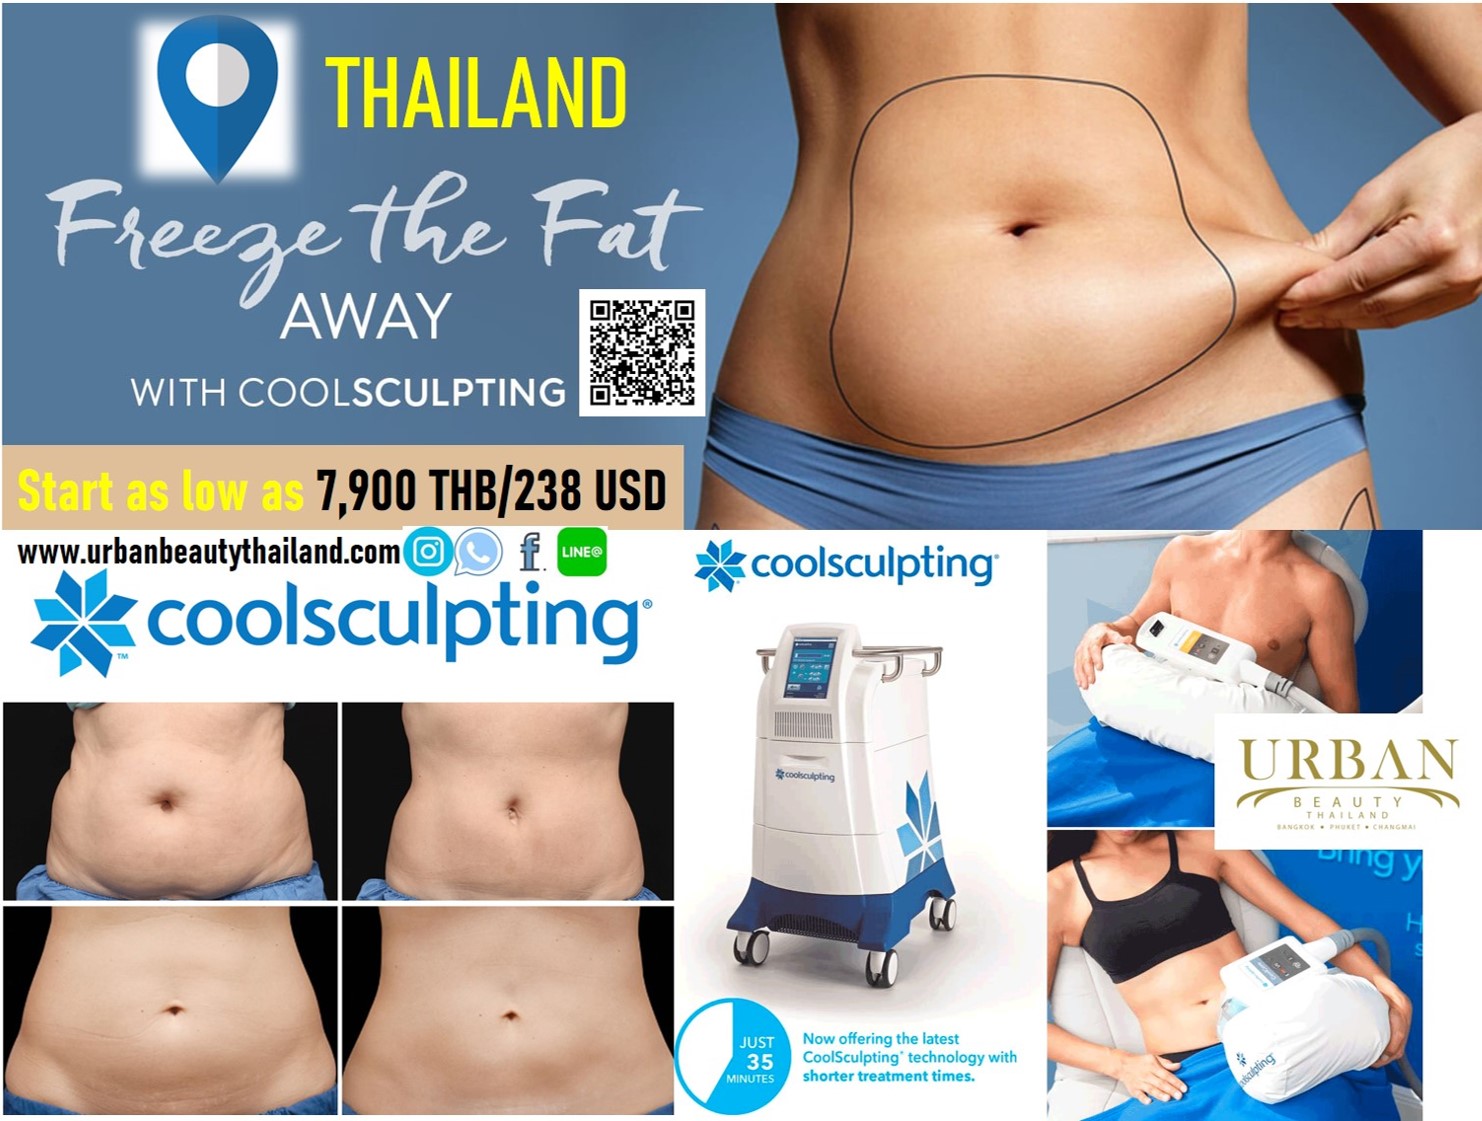 FDA approved CoolSculpting by Zeltiq Fat Reduction, Orlando Med Spa